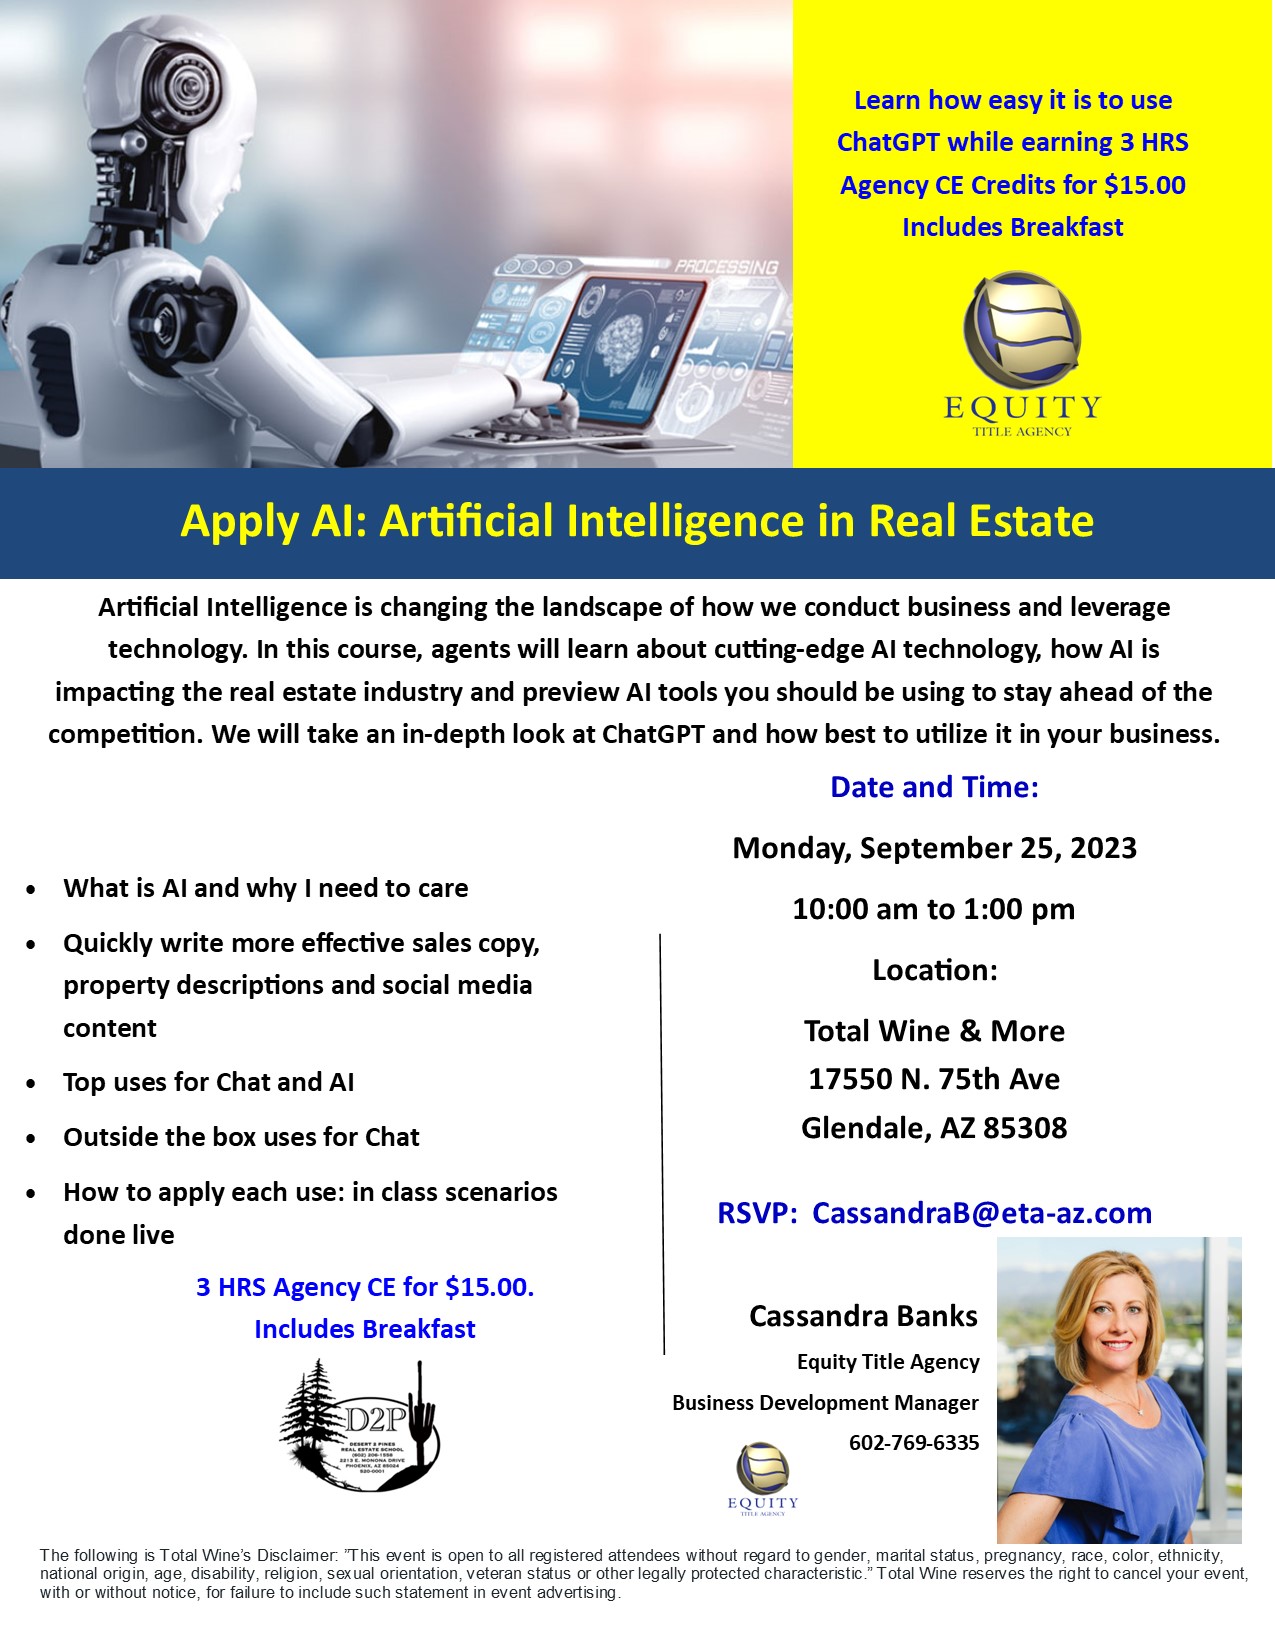 Apply AI: Artificial Intelligence in Real Estate